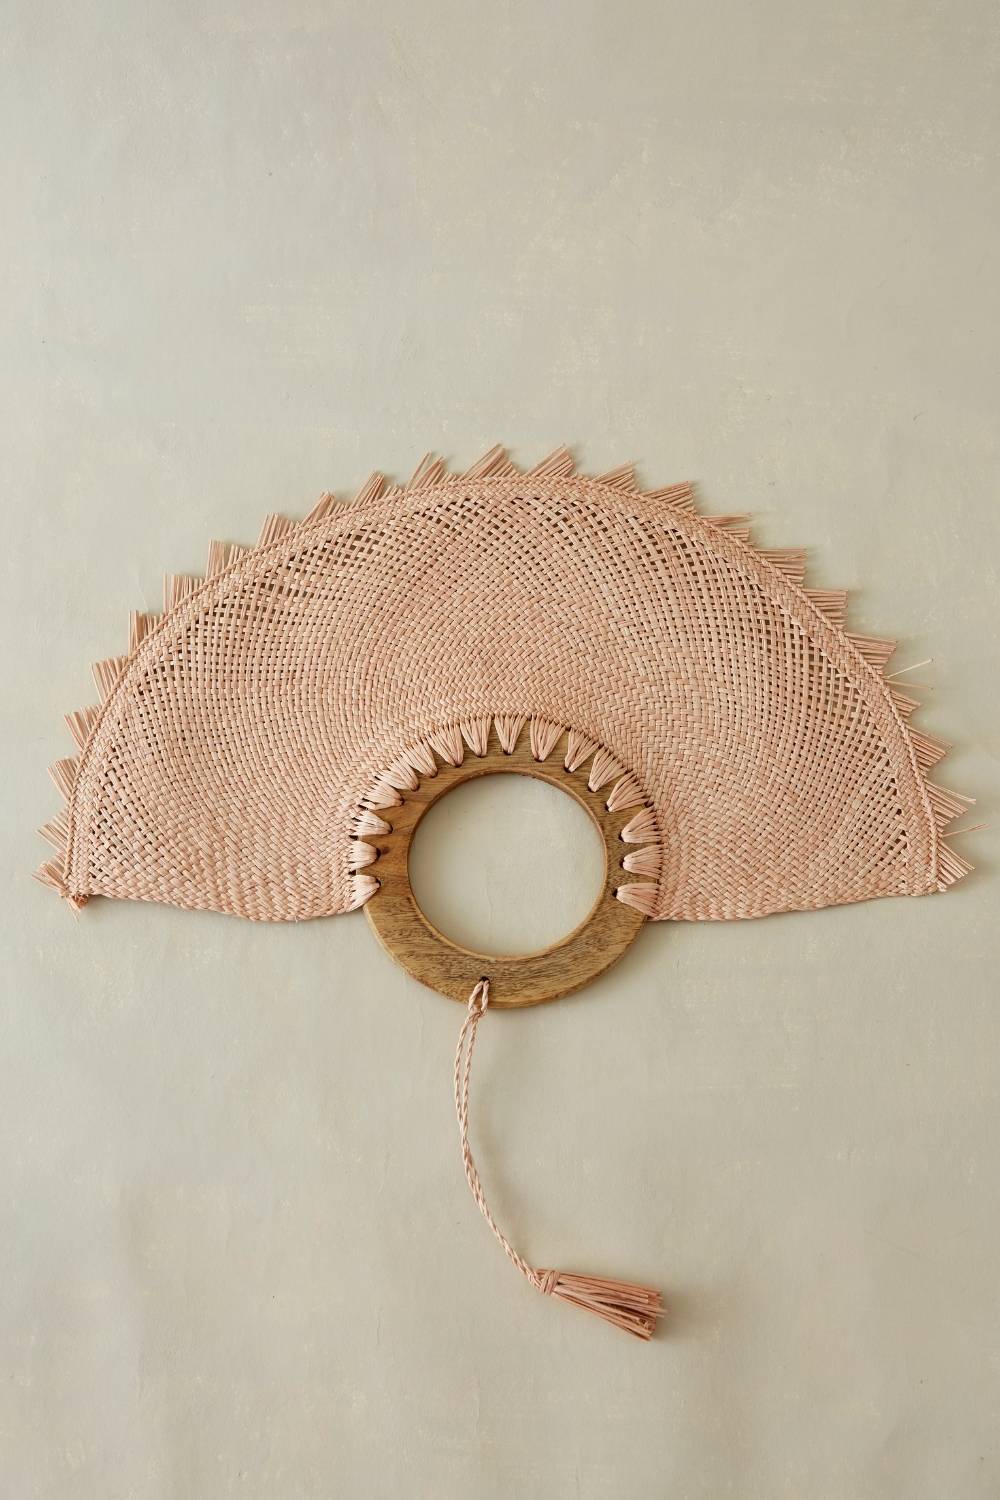 SALE - 30% OFF Woven wall hanging, Woven wall weaving